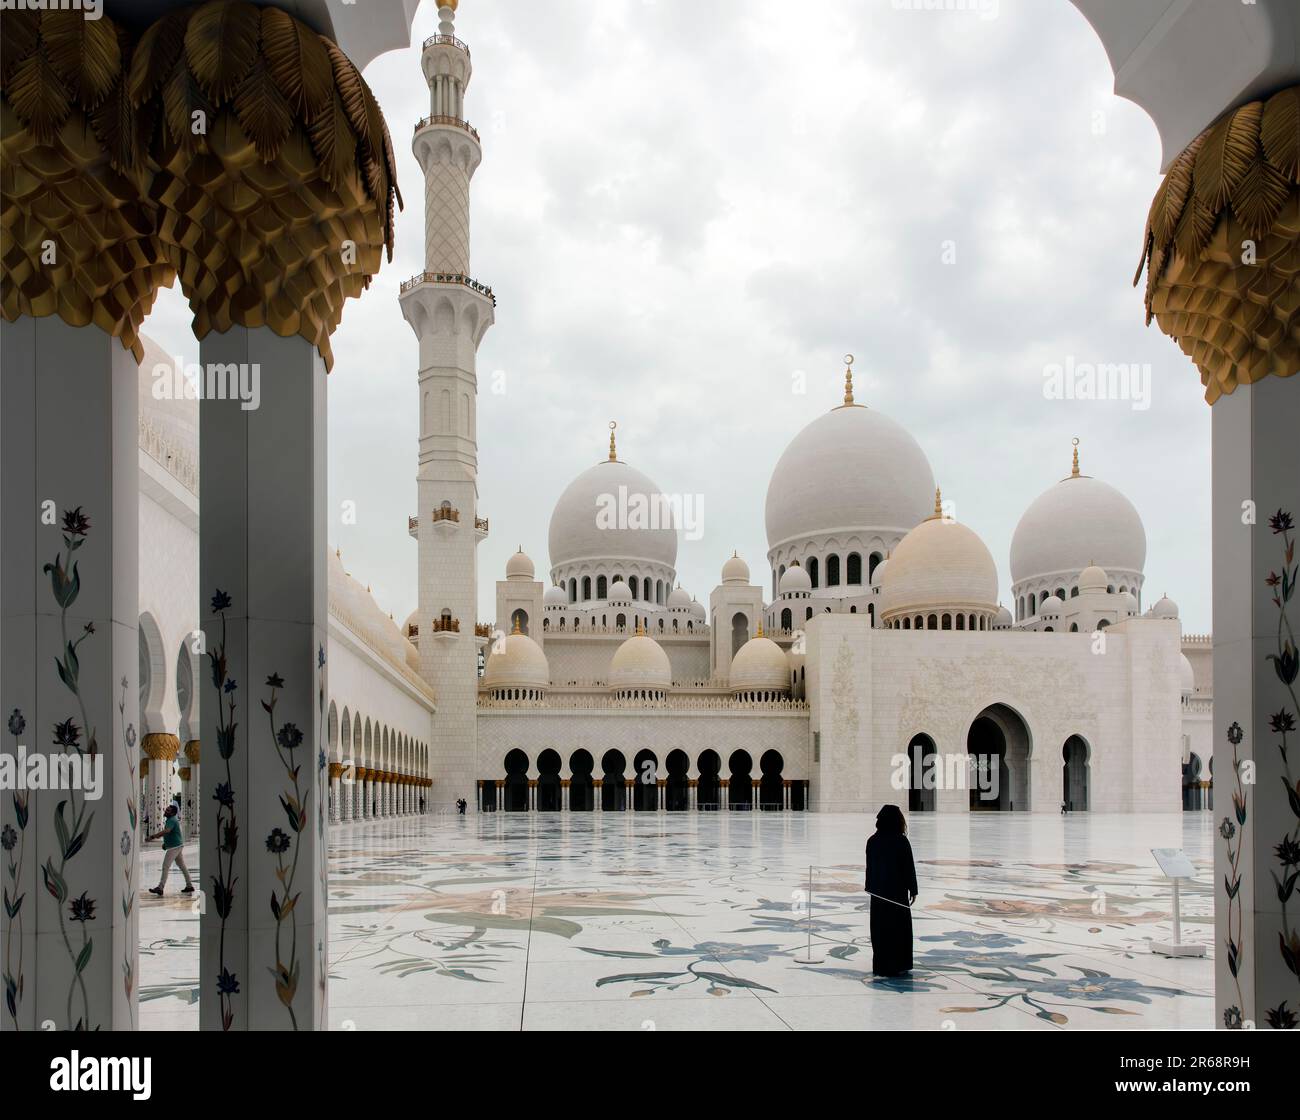 Woman in the central courtyard looks at Minaret and domes of the Sheikh Zayed Grand Mosque, Abu Dhabi UAE viewed through arch Stock Photo